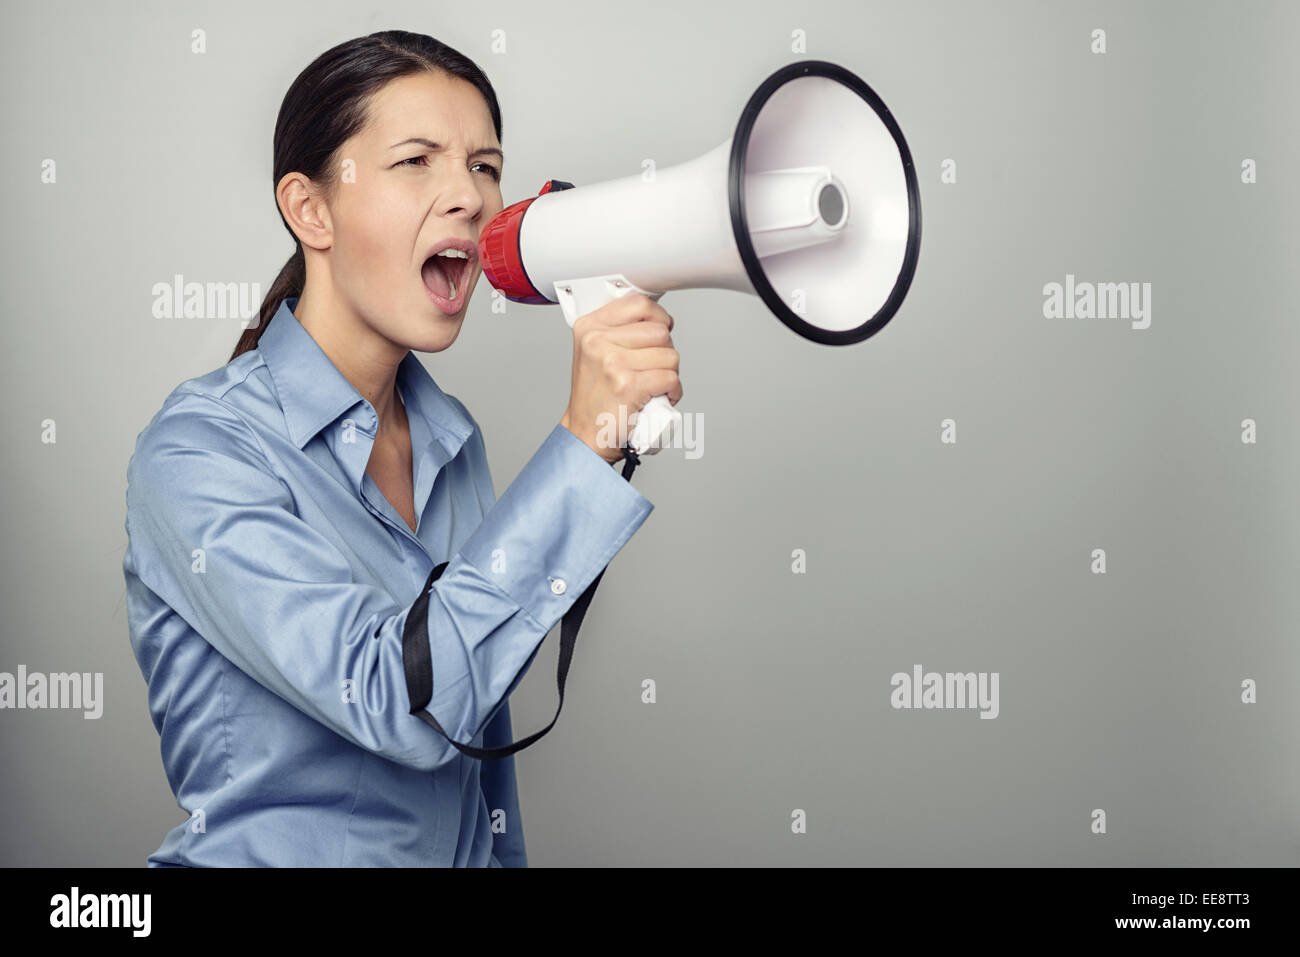 Woman speaking over a megaphone as she makes a public address, participates in a protest or organises a rally or promotion Stock Photo